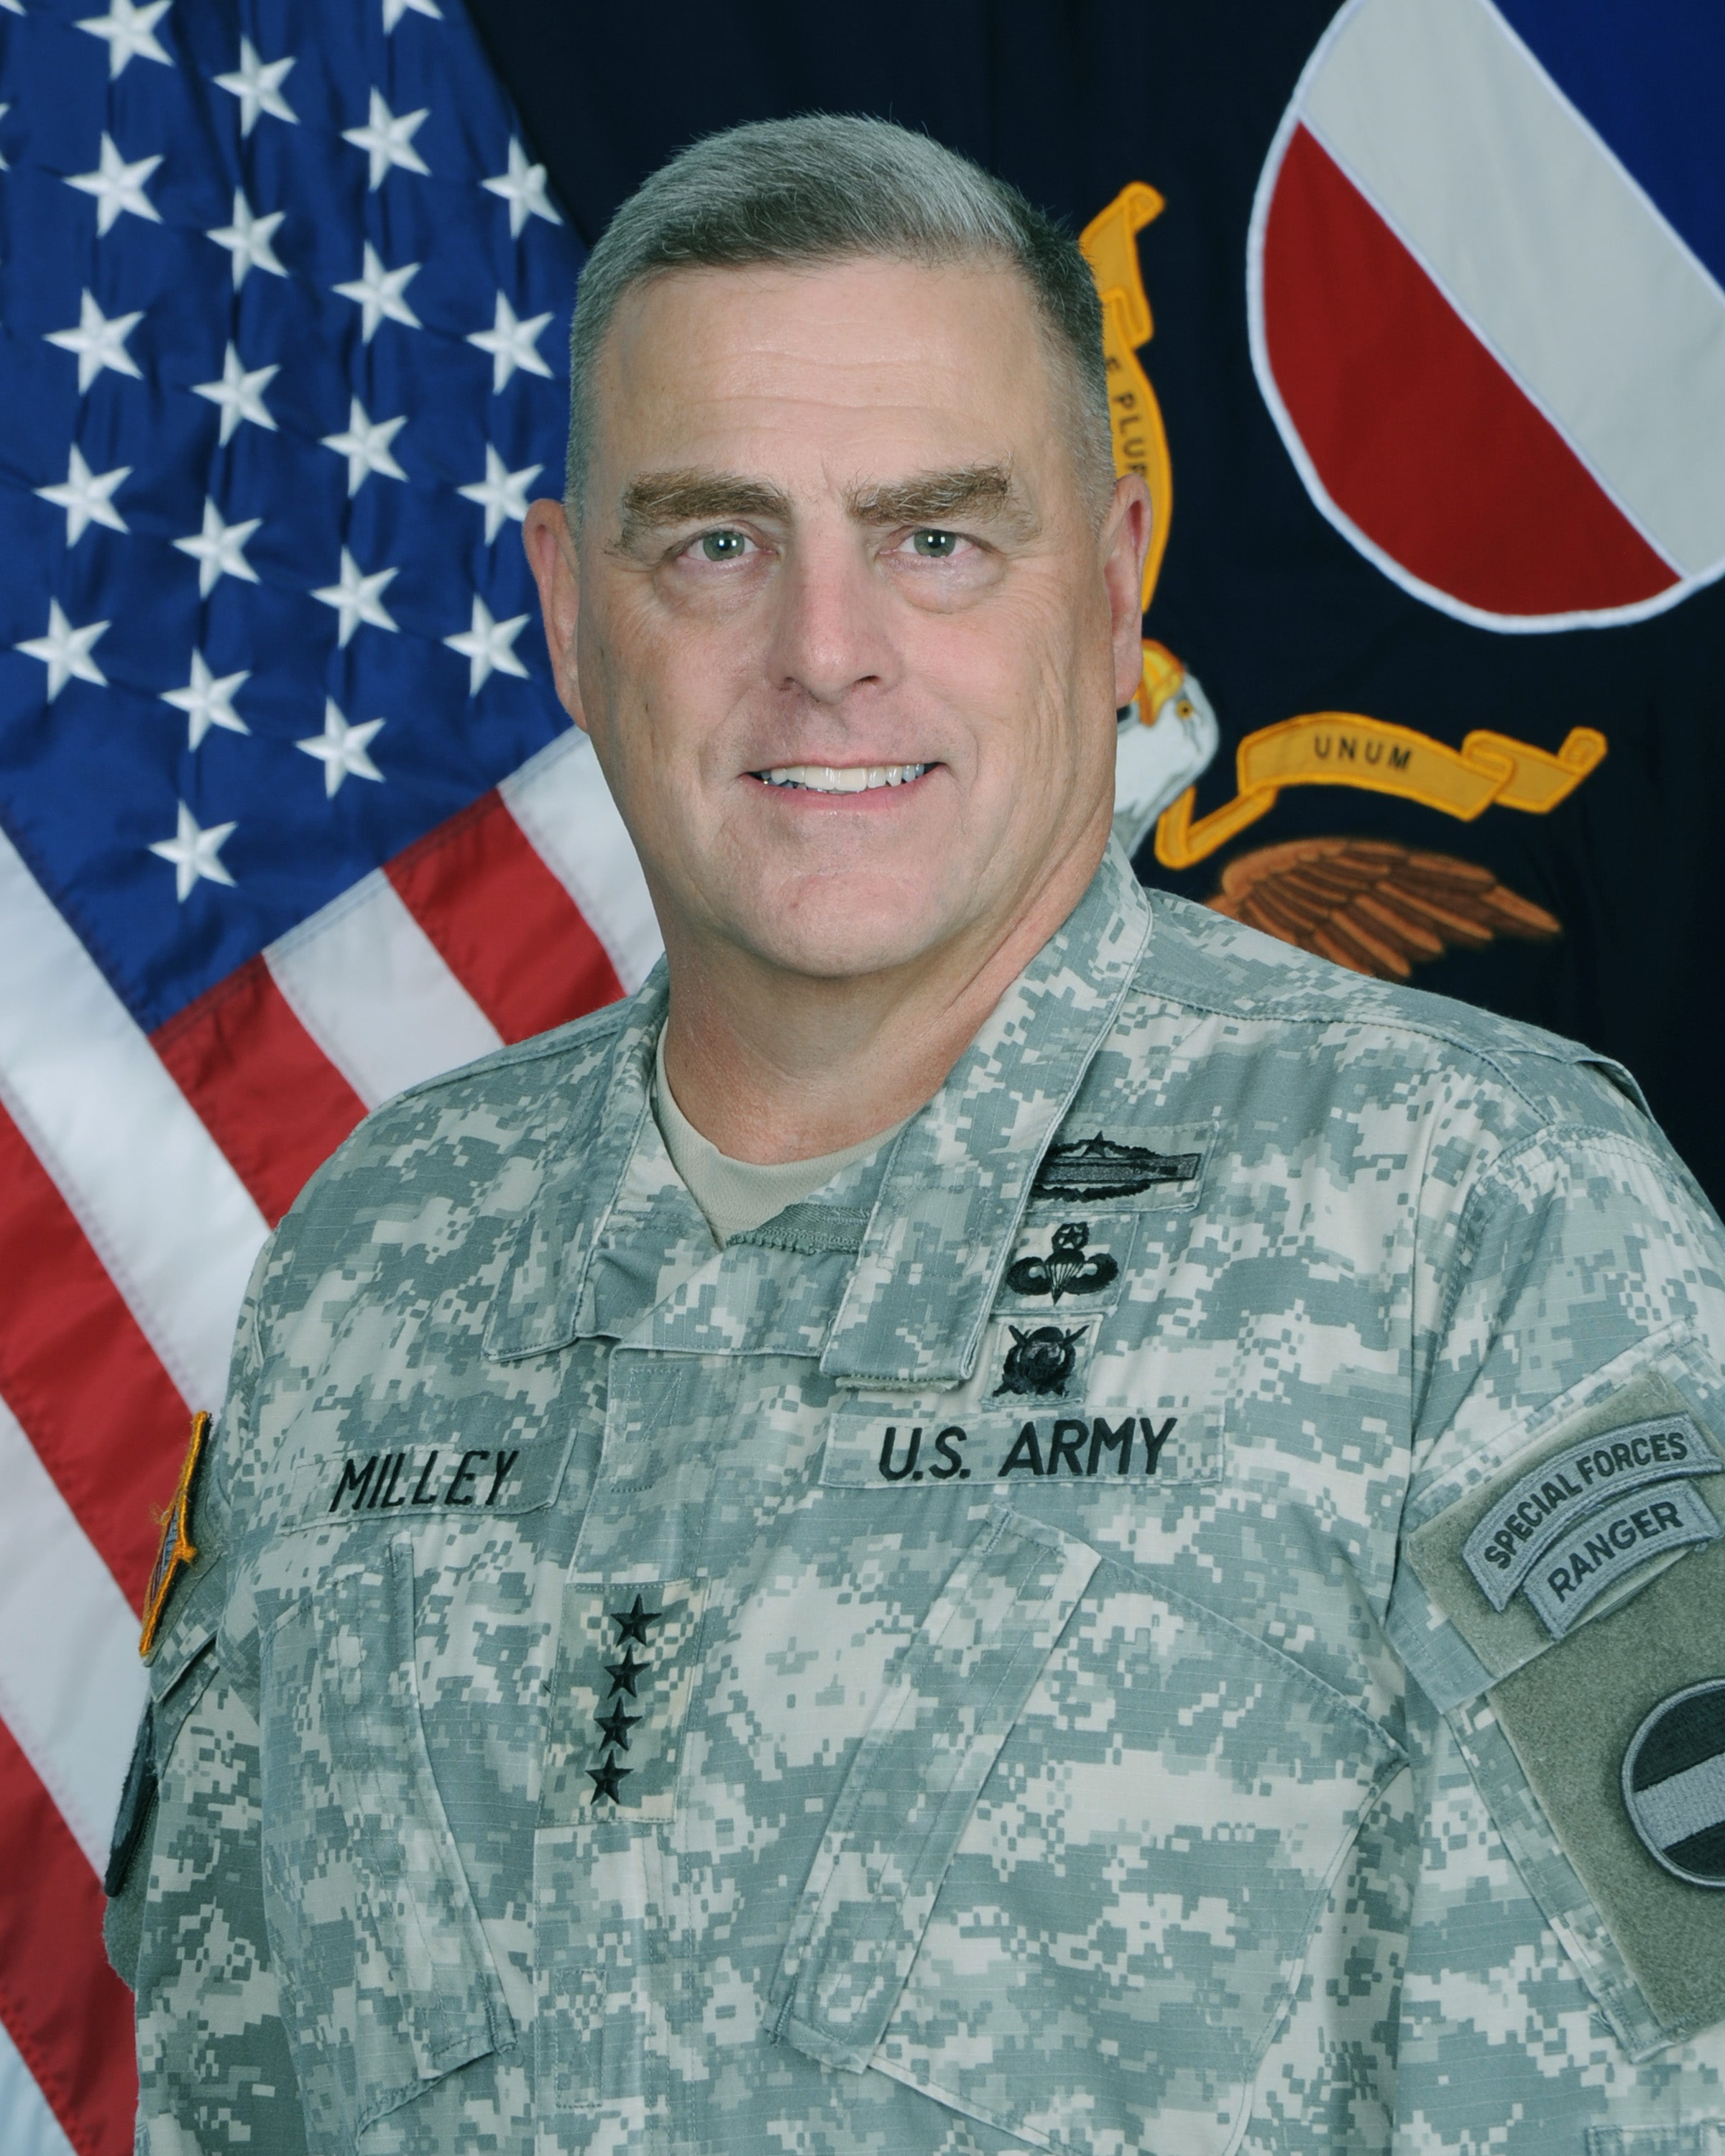 Milley Confirmed as 39th Army Chief of Staff | AUSA